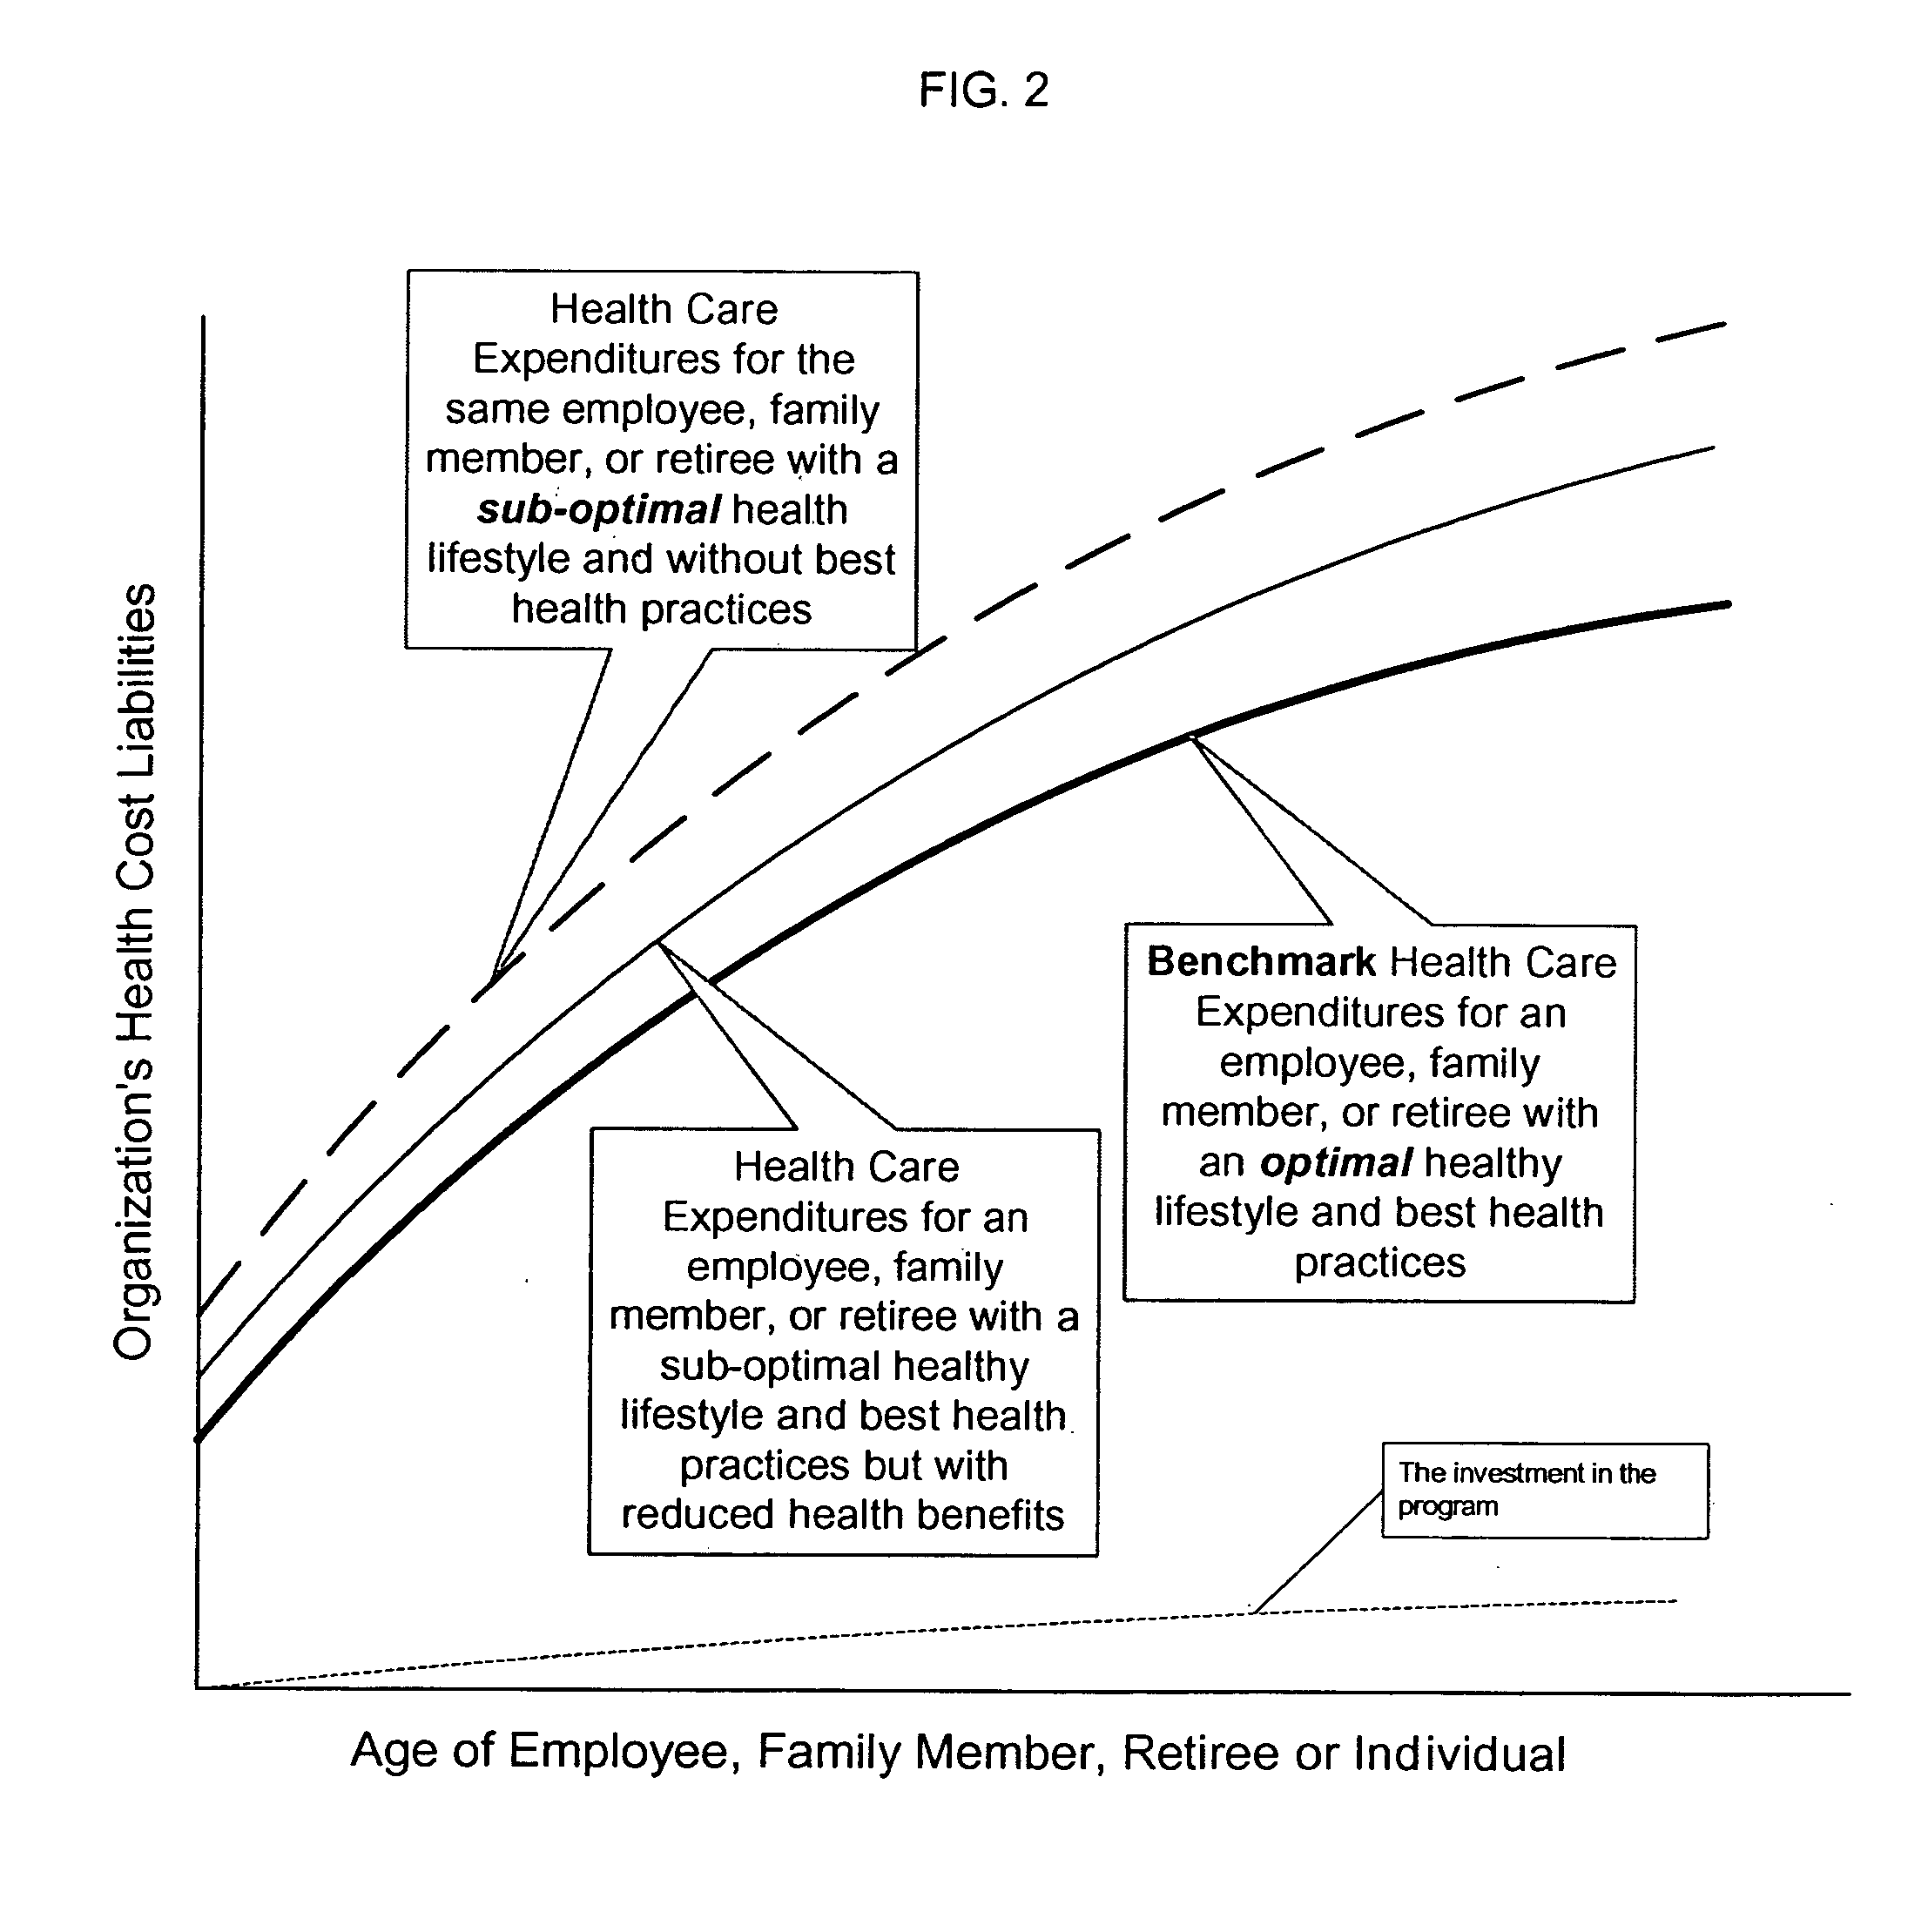 System and method for simultaneously optimizing the quality of life and controlling health care costs